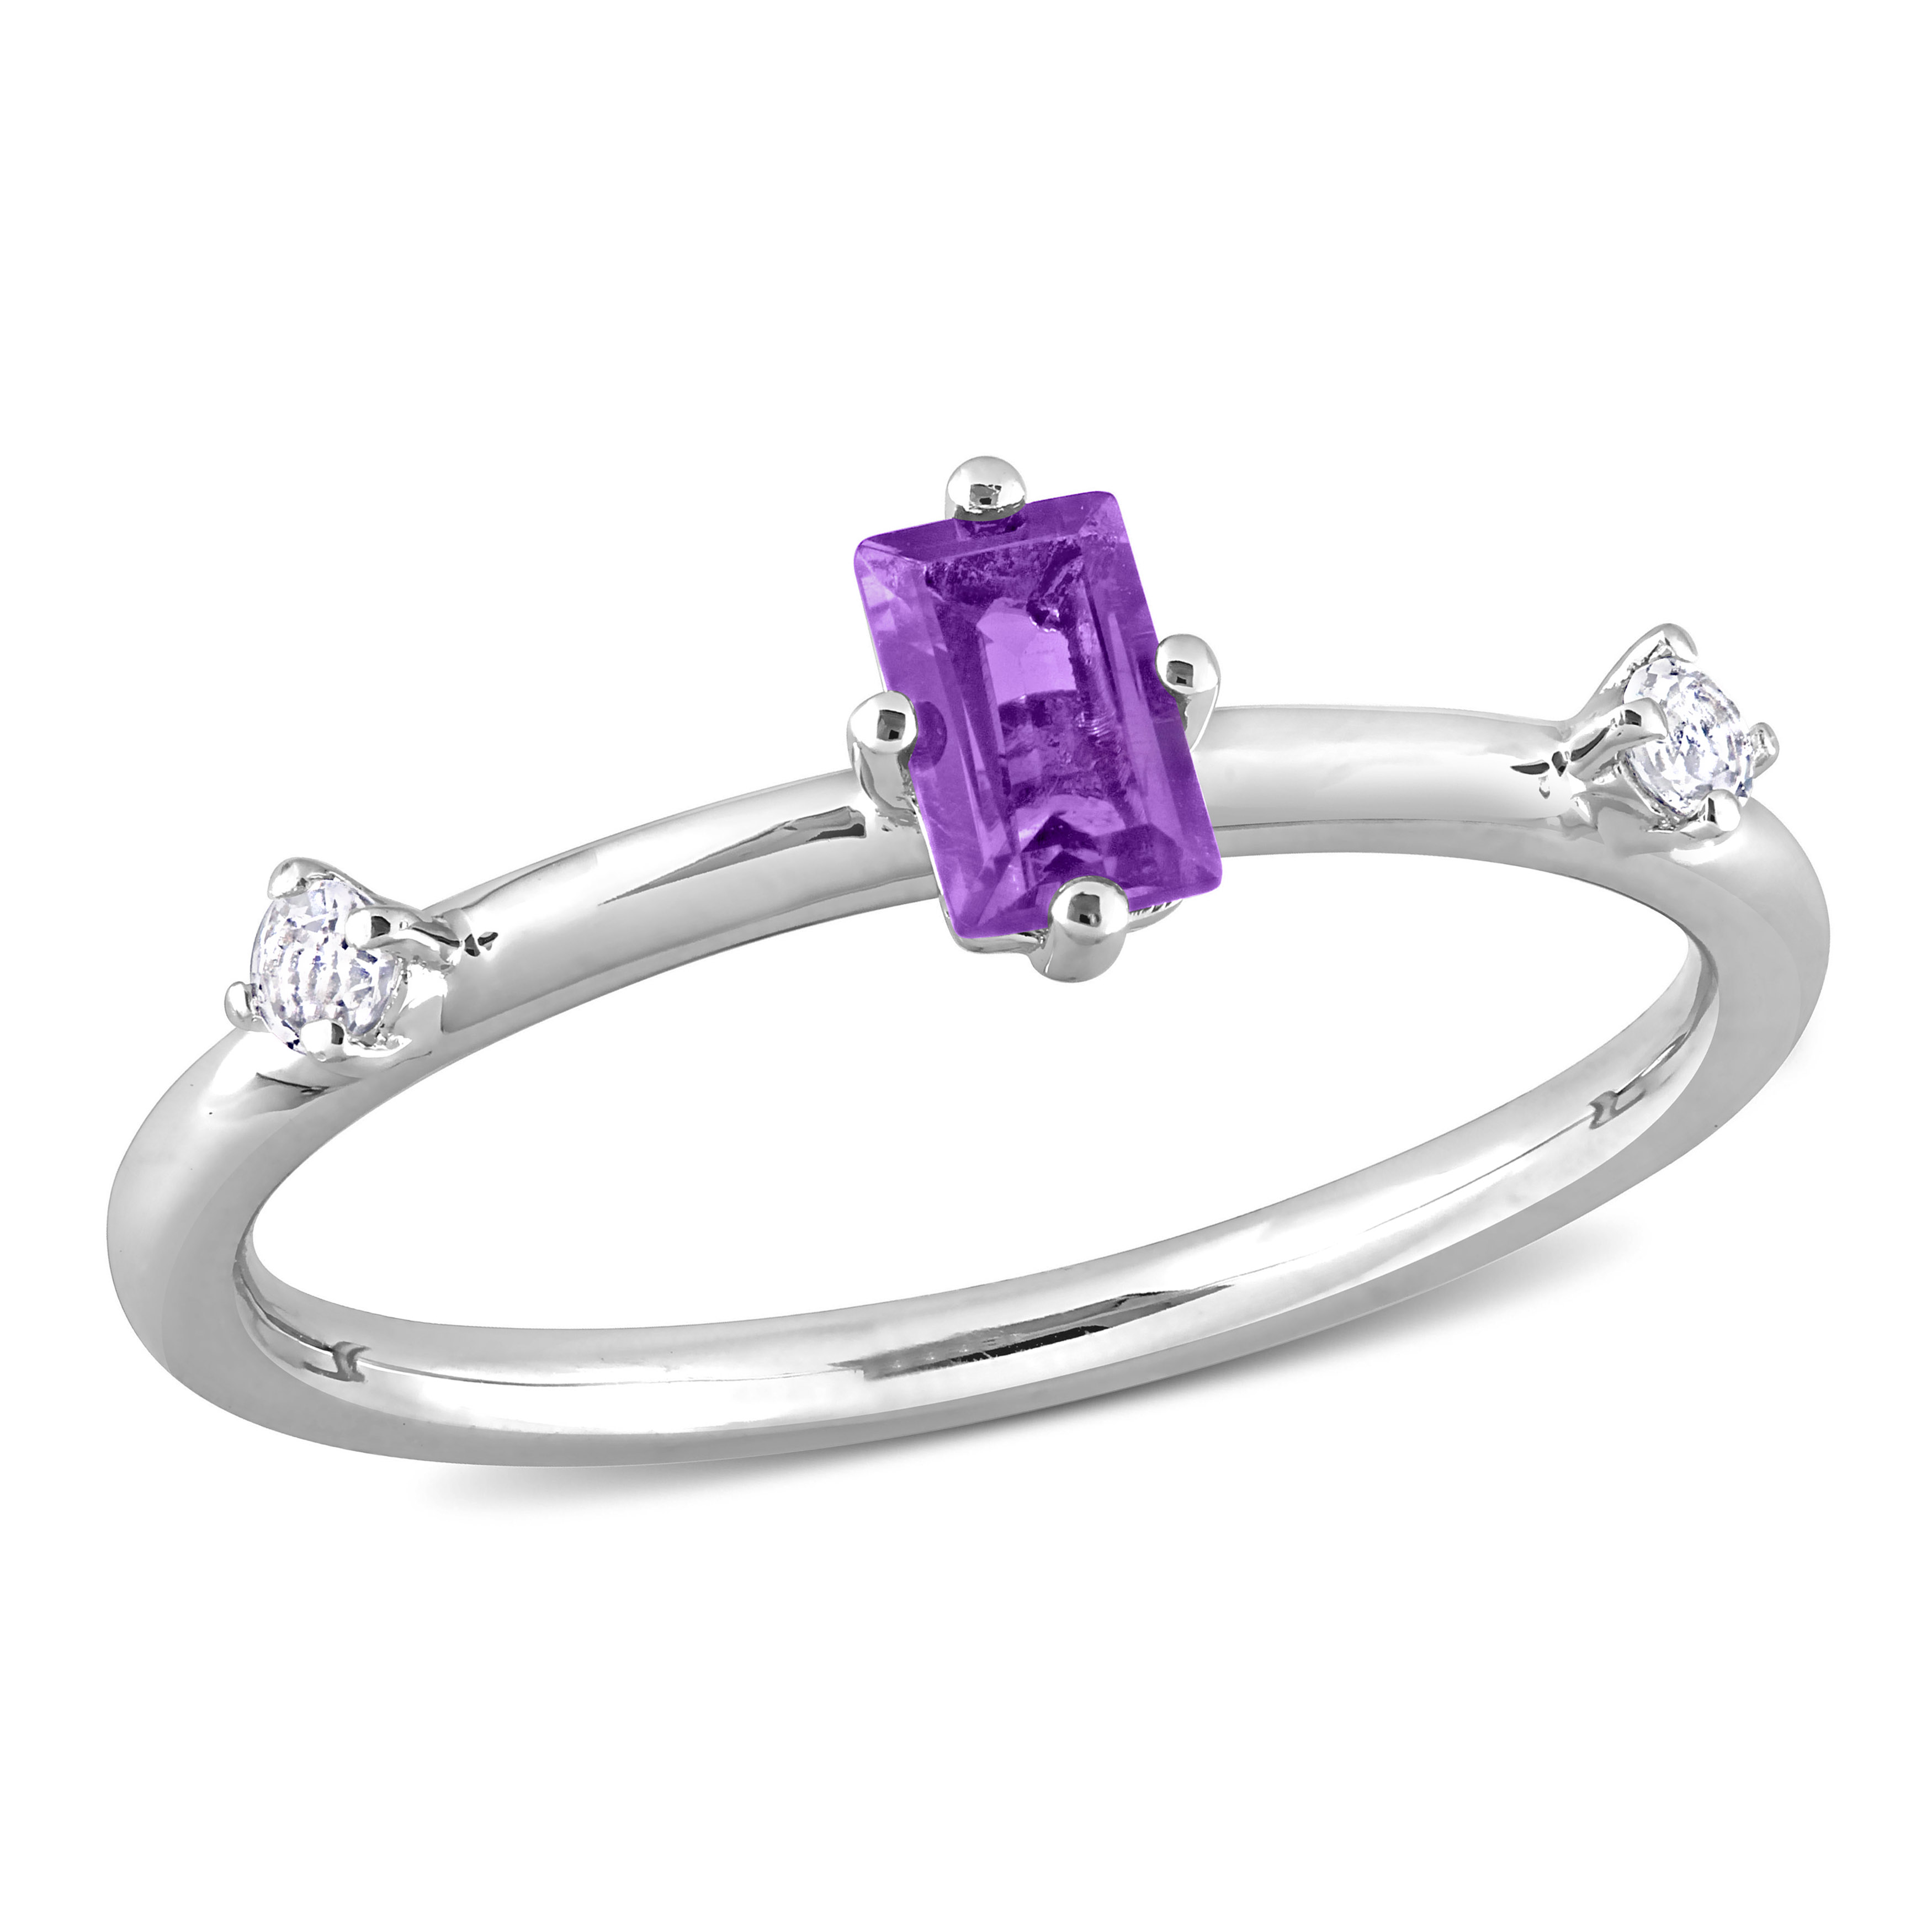 2/5 CT TGW Emerald Cut Amethyst and White Topaz 3-Stone Ring in Sterling Silver